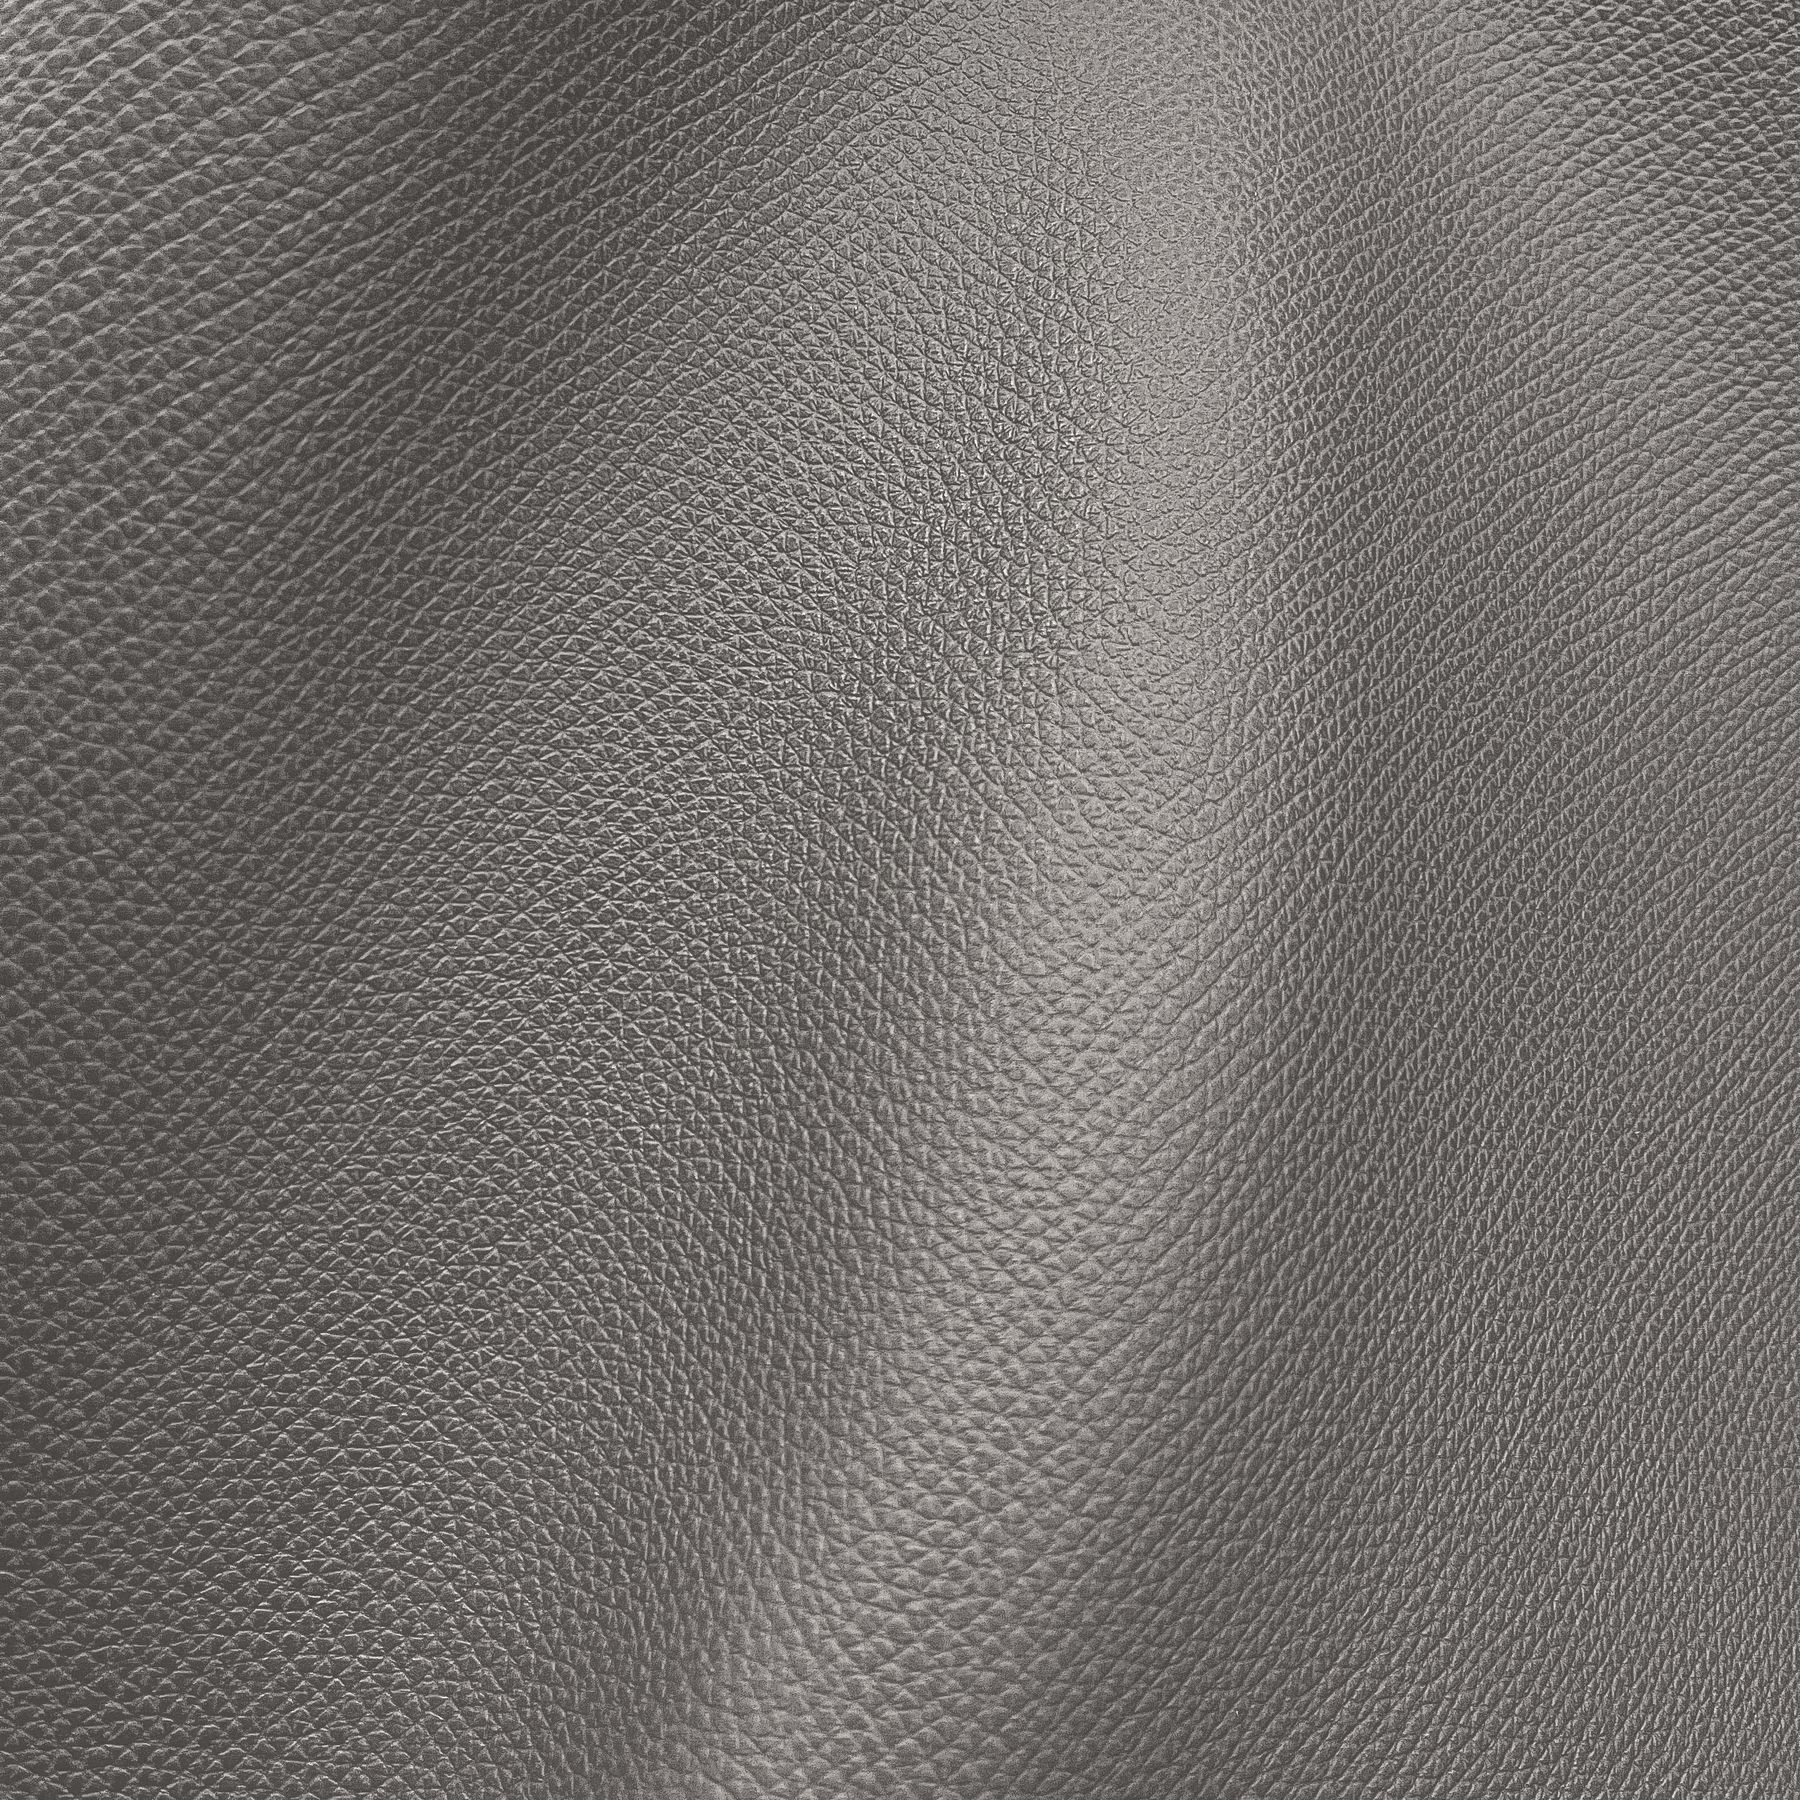 Soft PU Leather Upholstery Fabric 1.2mm Thick Upholstery Leather Distressed  Bark Fabric(Khaki,36x54) : : Home